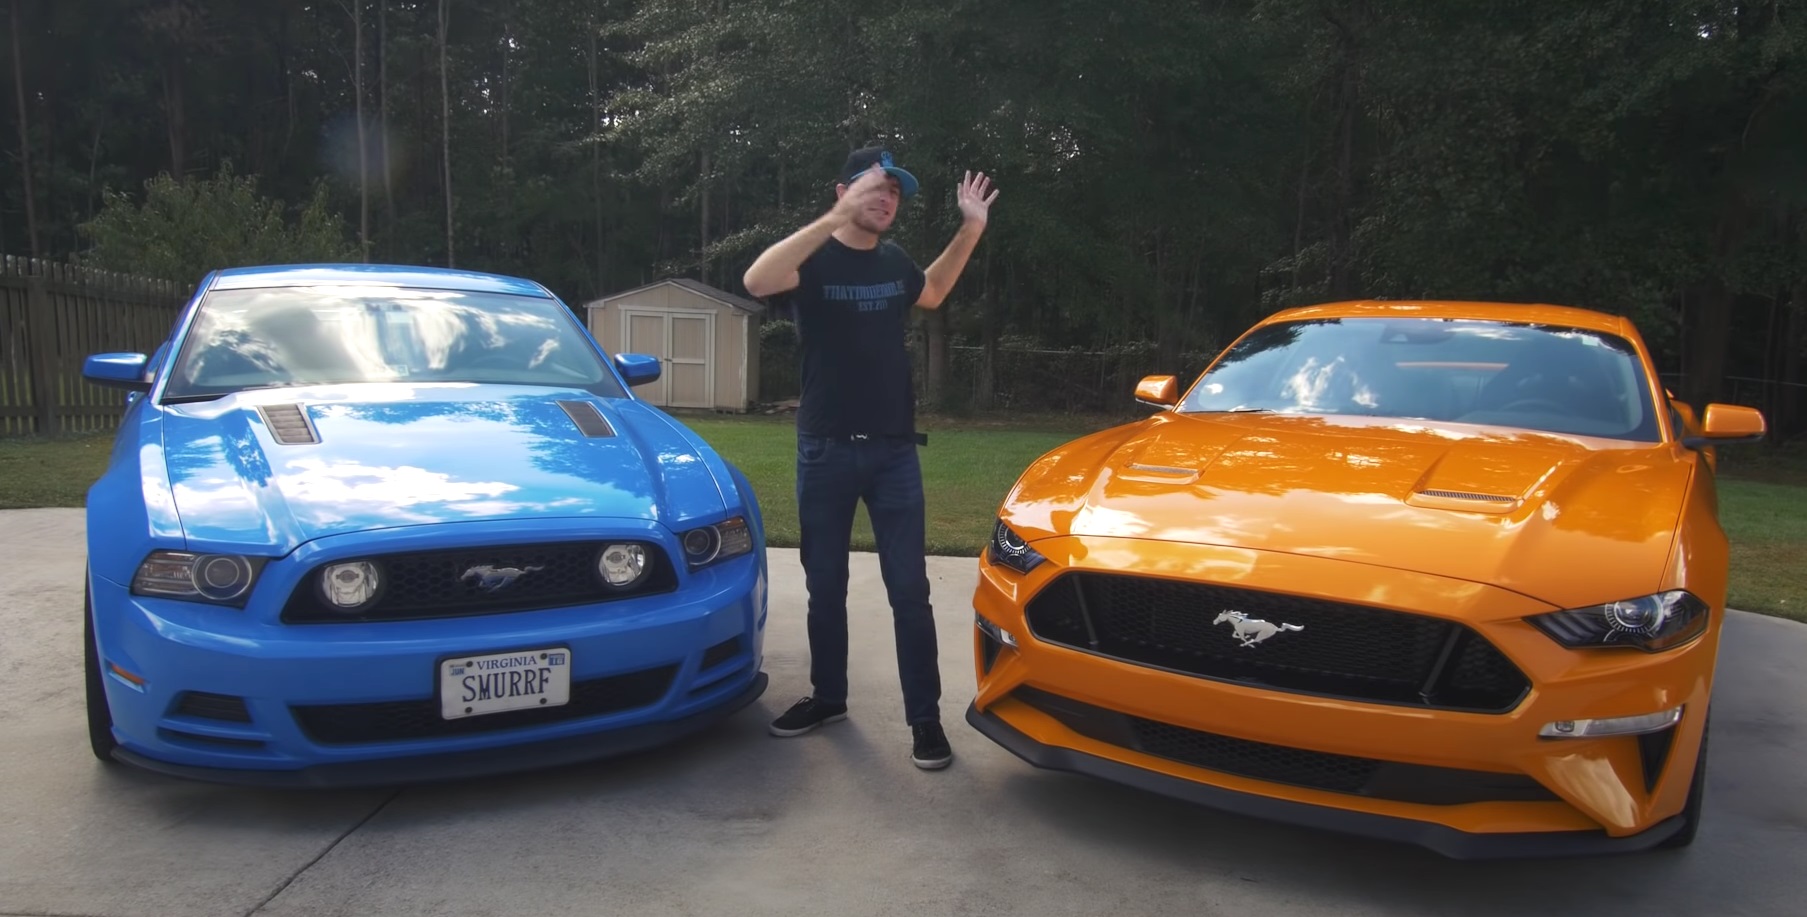 Video: 2013 Ford Mustang Boss 302 Or 2018 Mustang GT? In-Depth Comparison